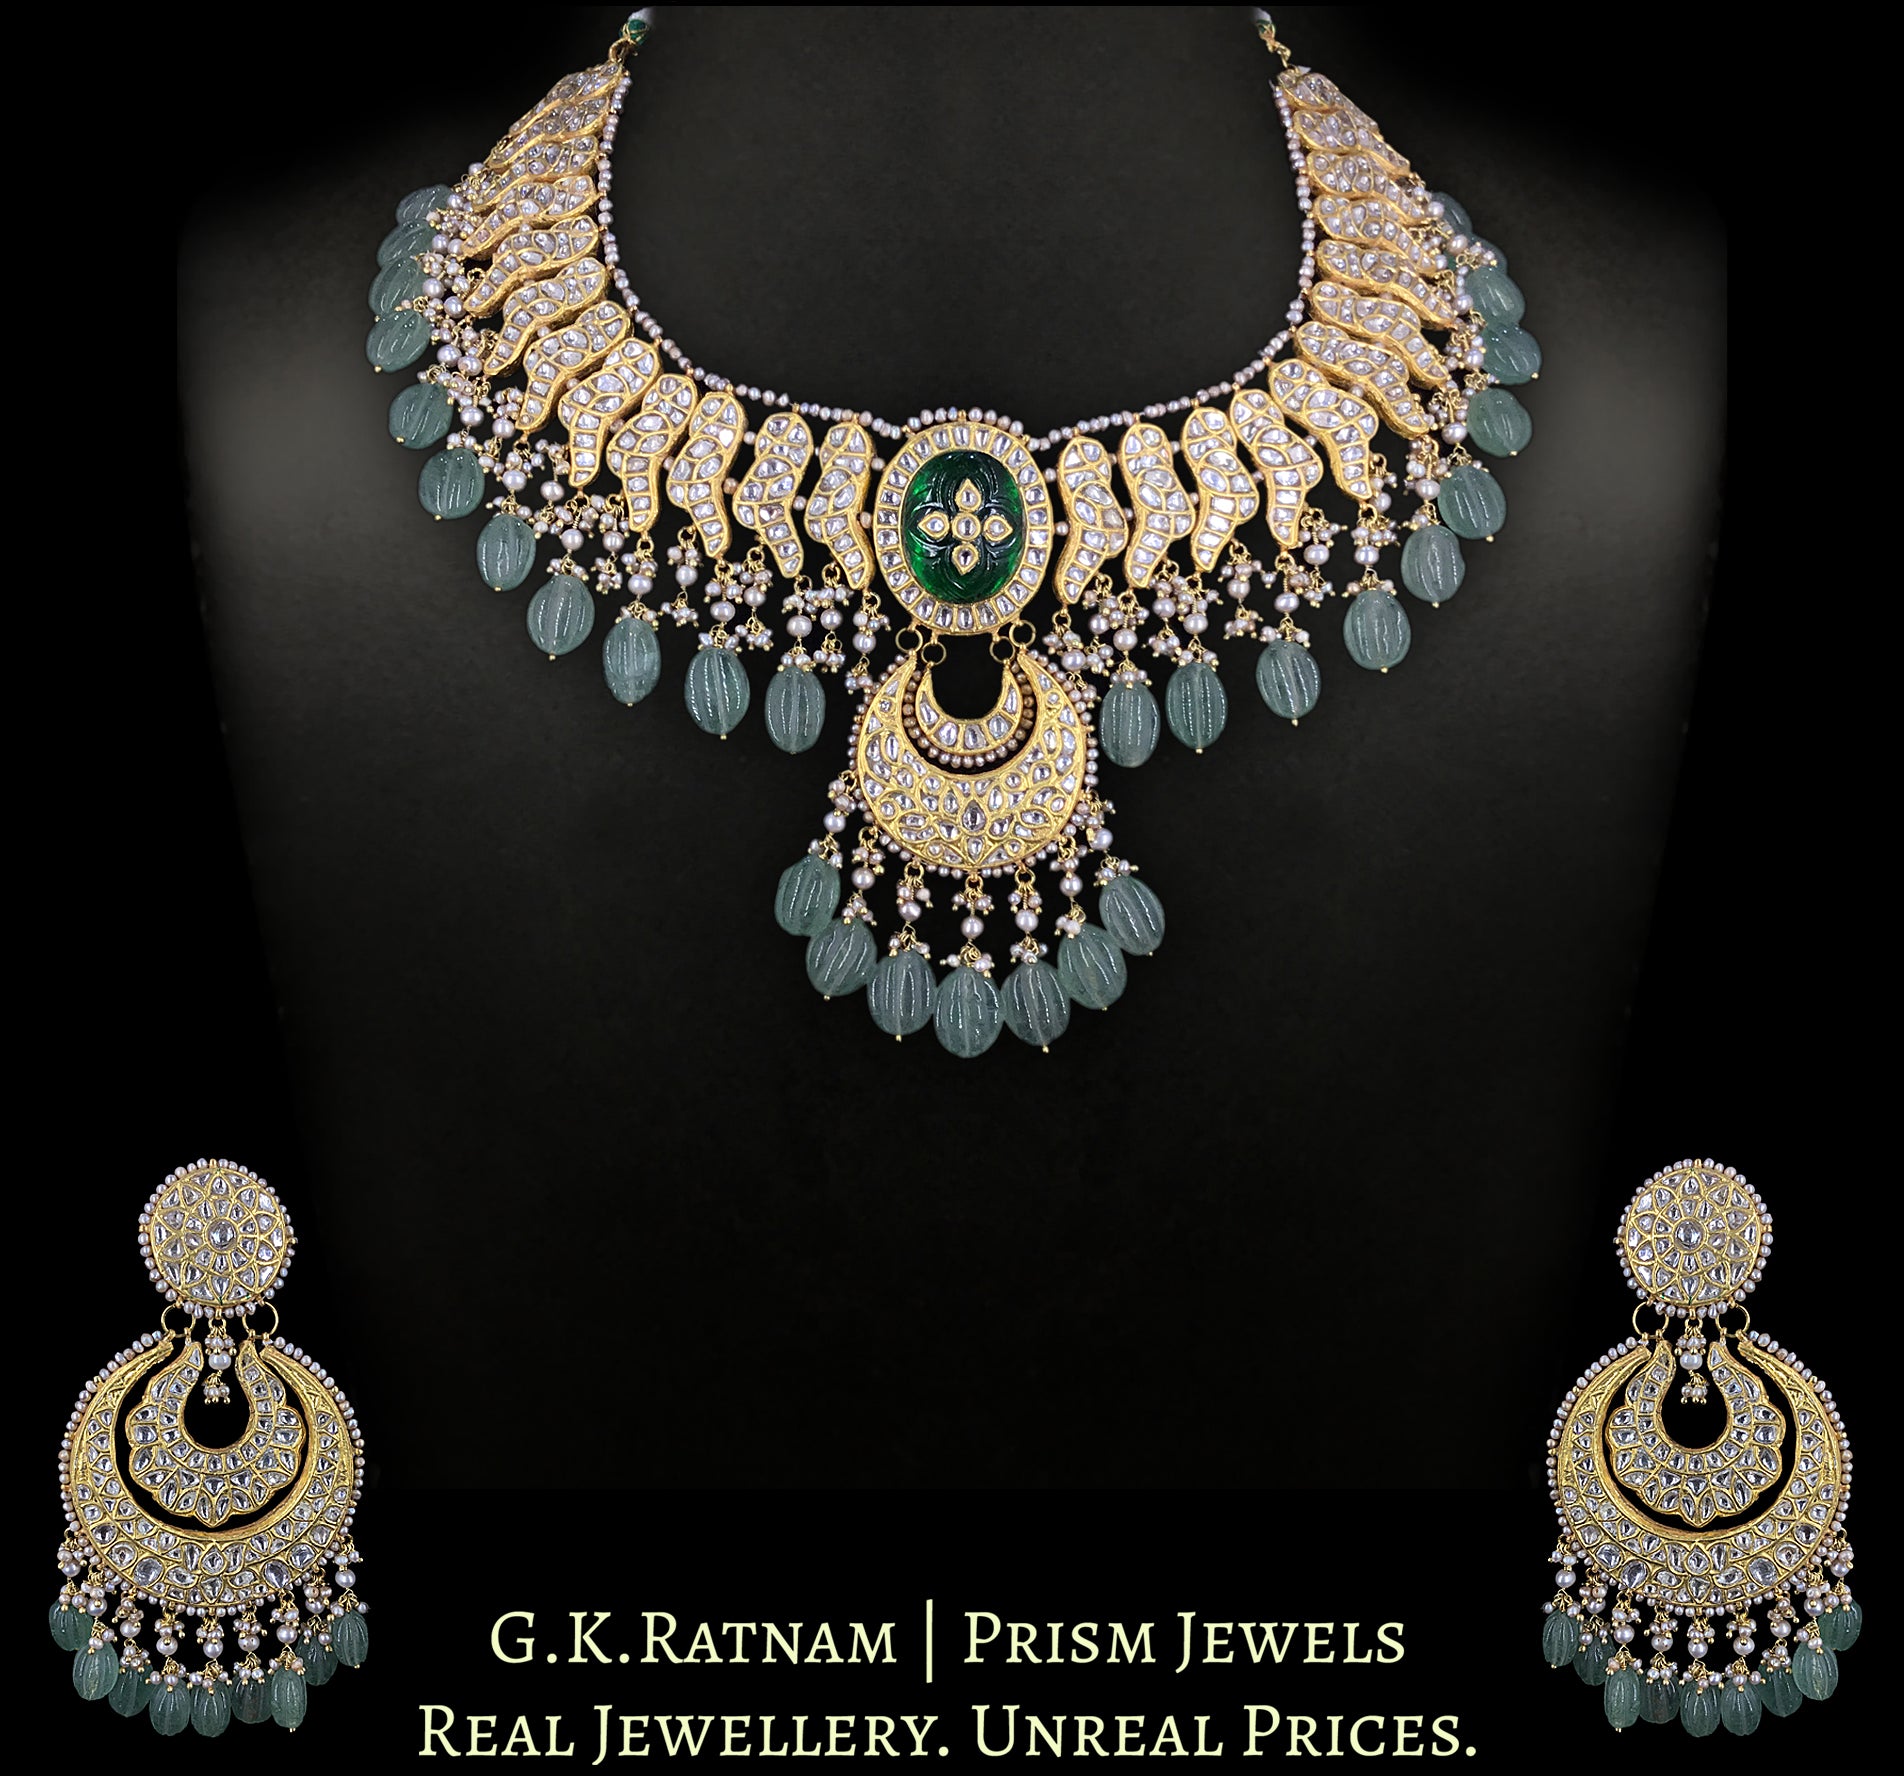 23k Gold and Diamond Polki Necklace Set with basra-like Pearls and hand-carved Melons